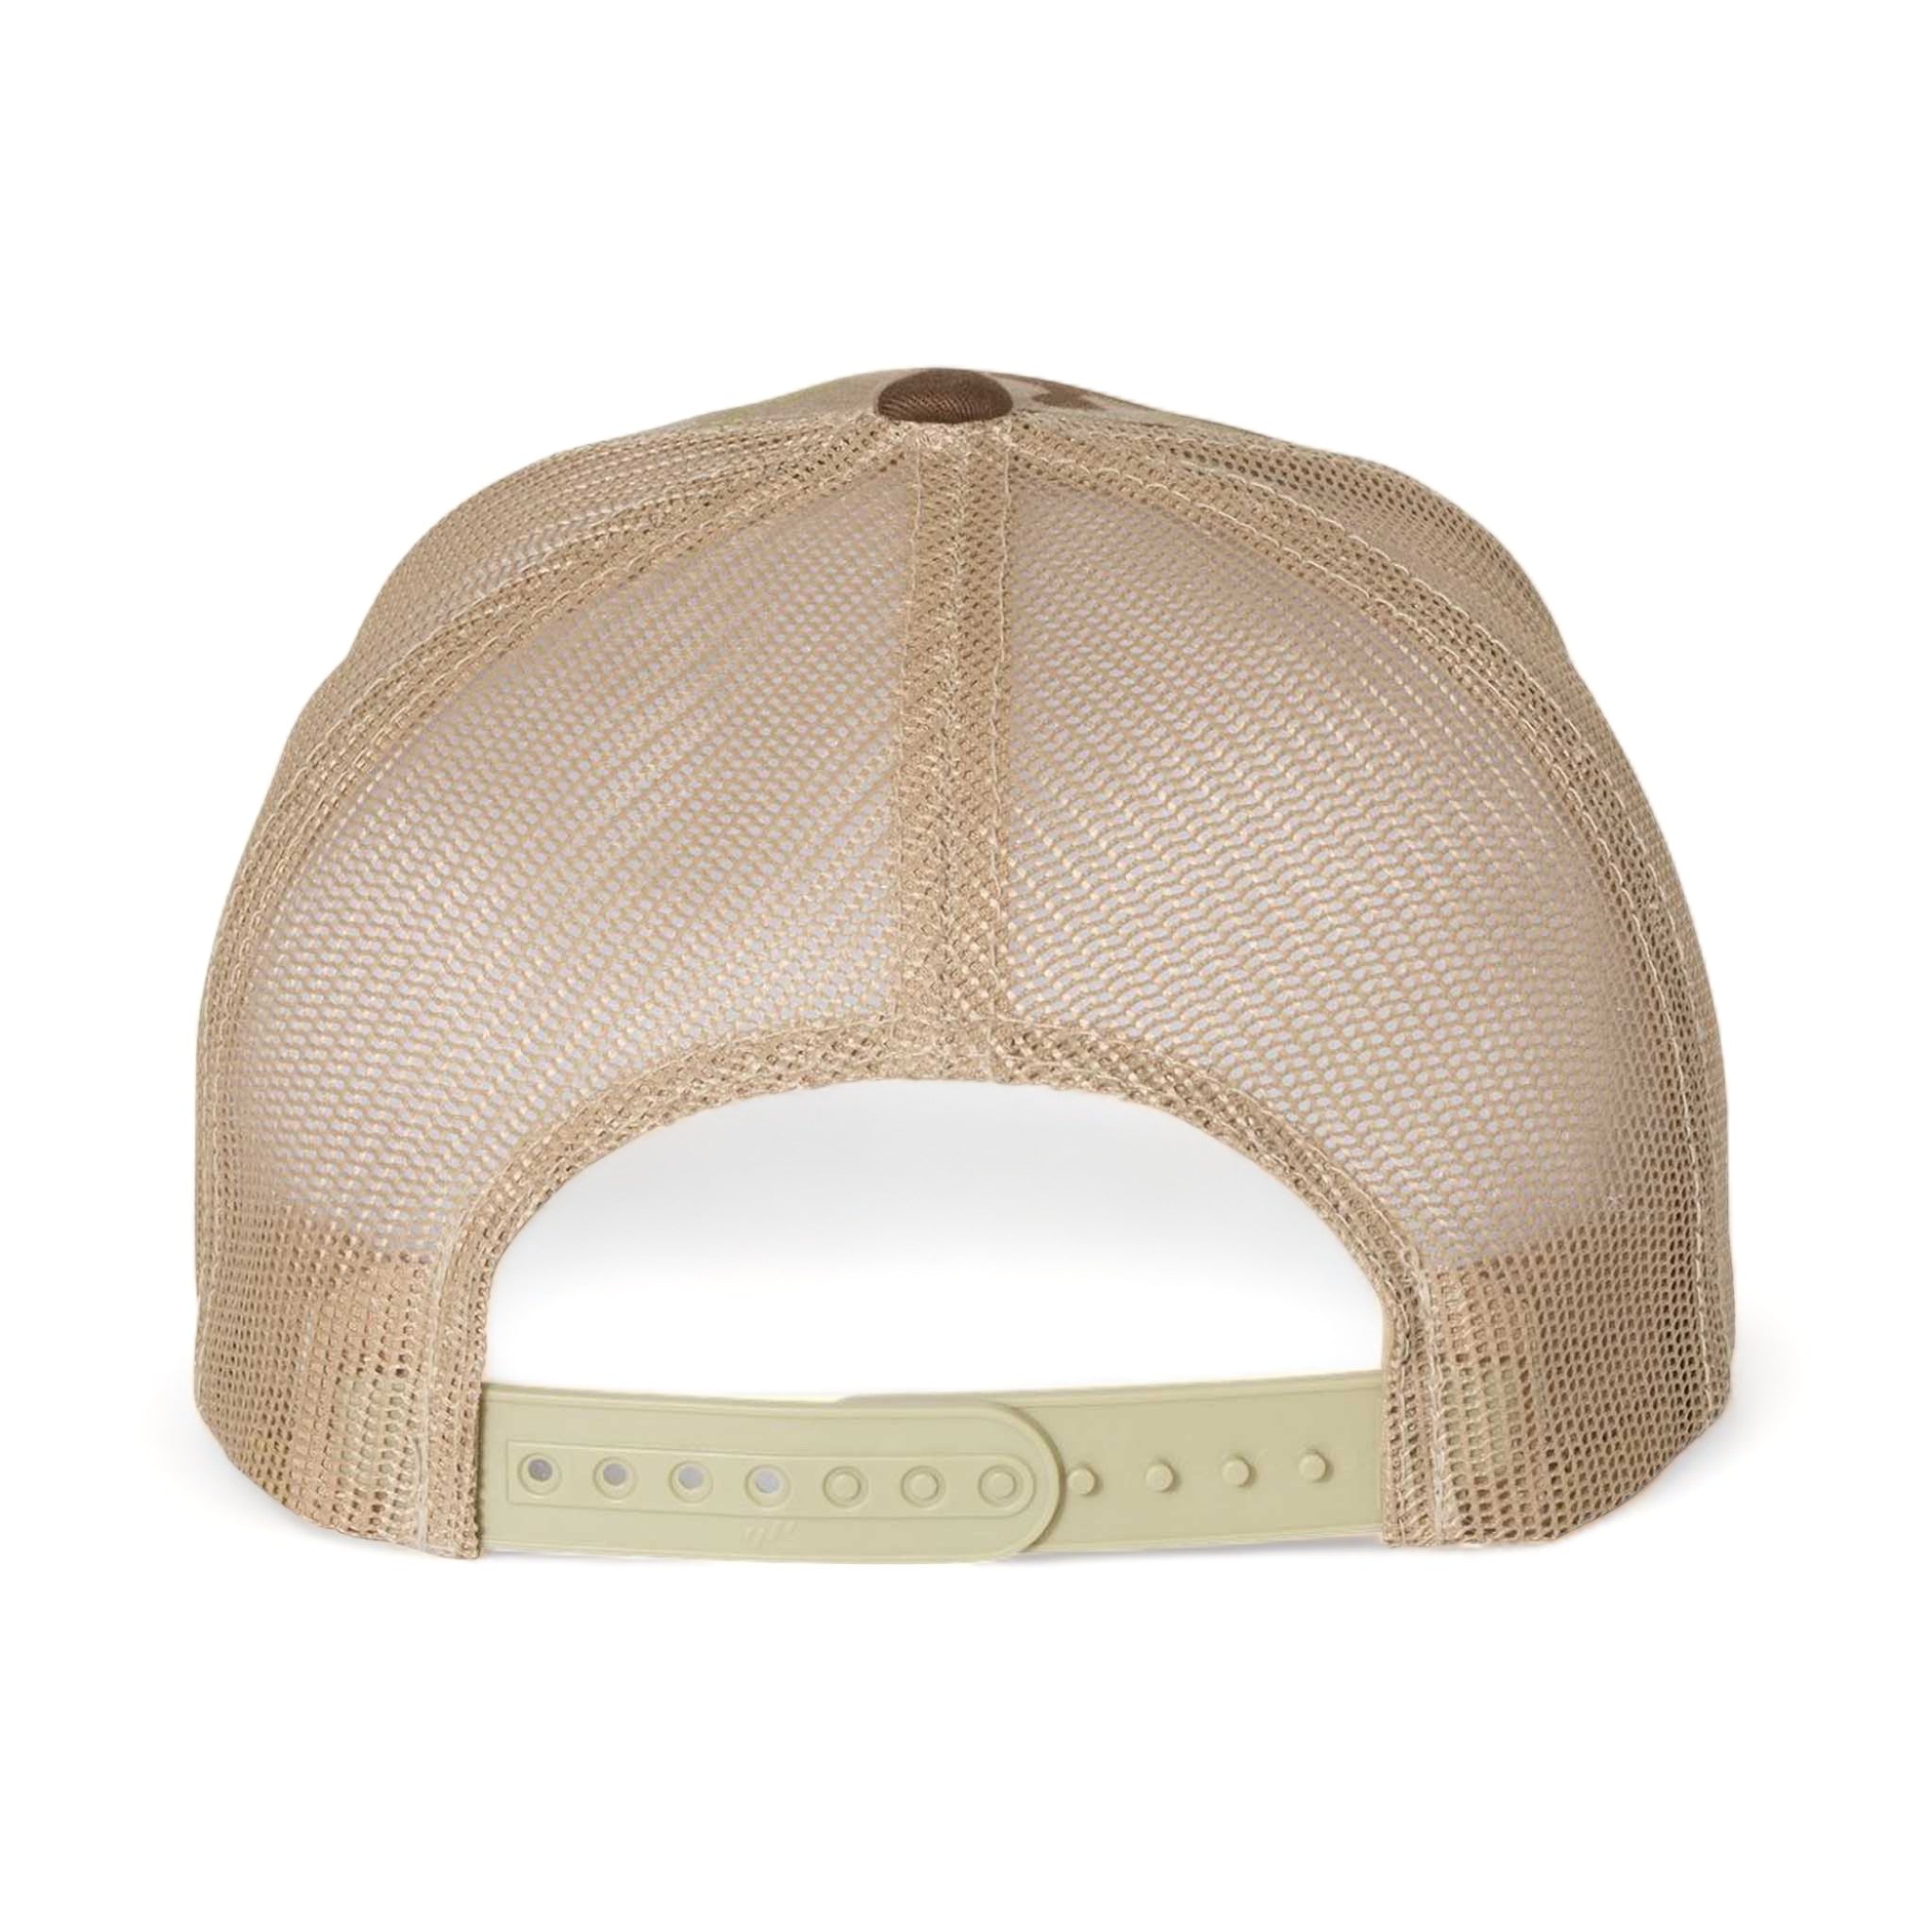 Back view of YP Classics 6606 custom hat in multicam arid and tan